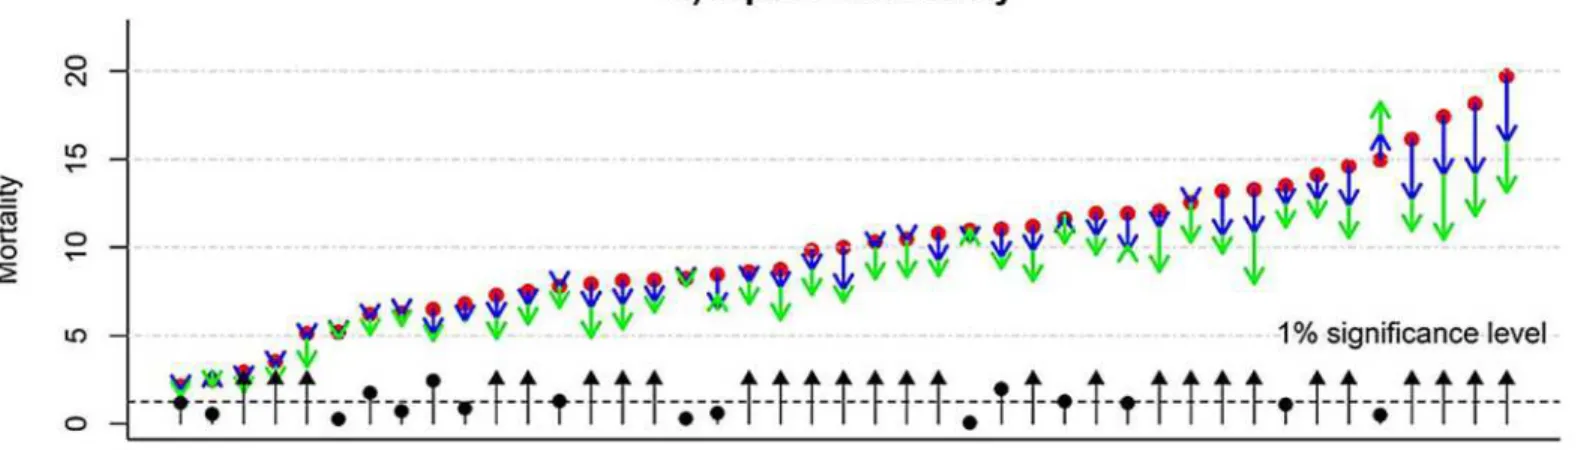 Fig 2. “ Point-Direction ” plots show inpatient mortality (multiplied by 1000, i.e., per thousand) in year 2010 (red dots) and their directional changes in year 2011 (blue arrow) and in year 2012 (green arrow) across all 43 hospitals: a) the overall inpati